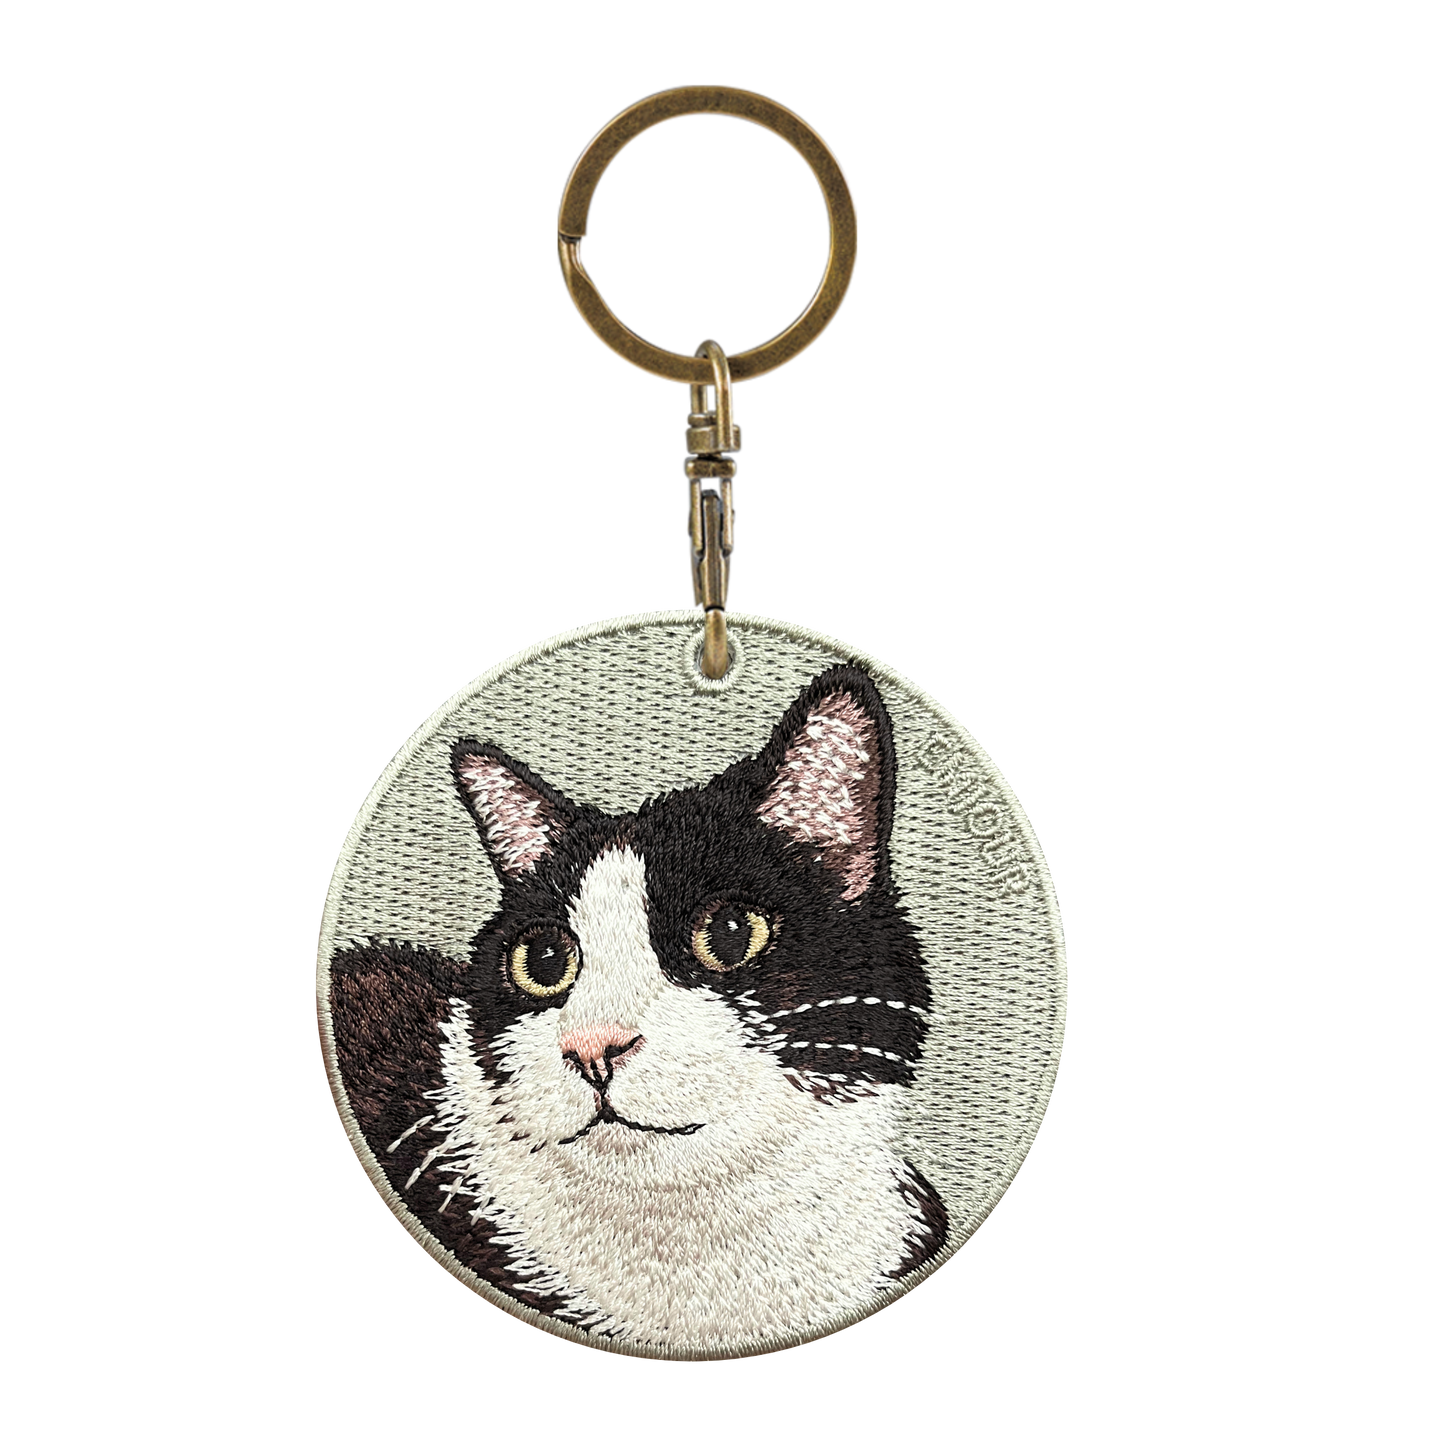 Double-Sided Embroidered Key Chain - Sanhua Mao